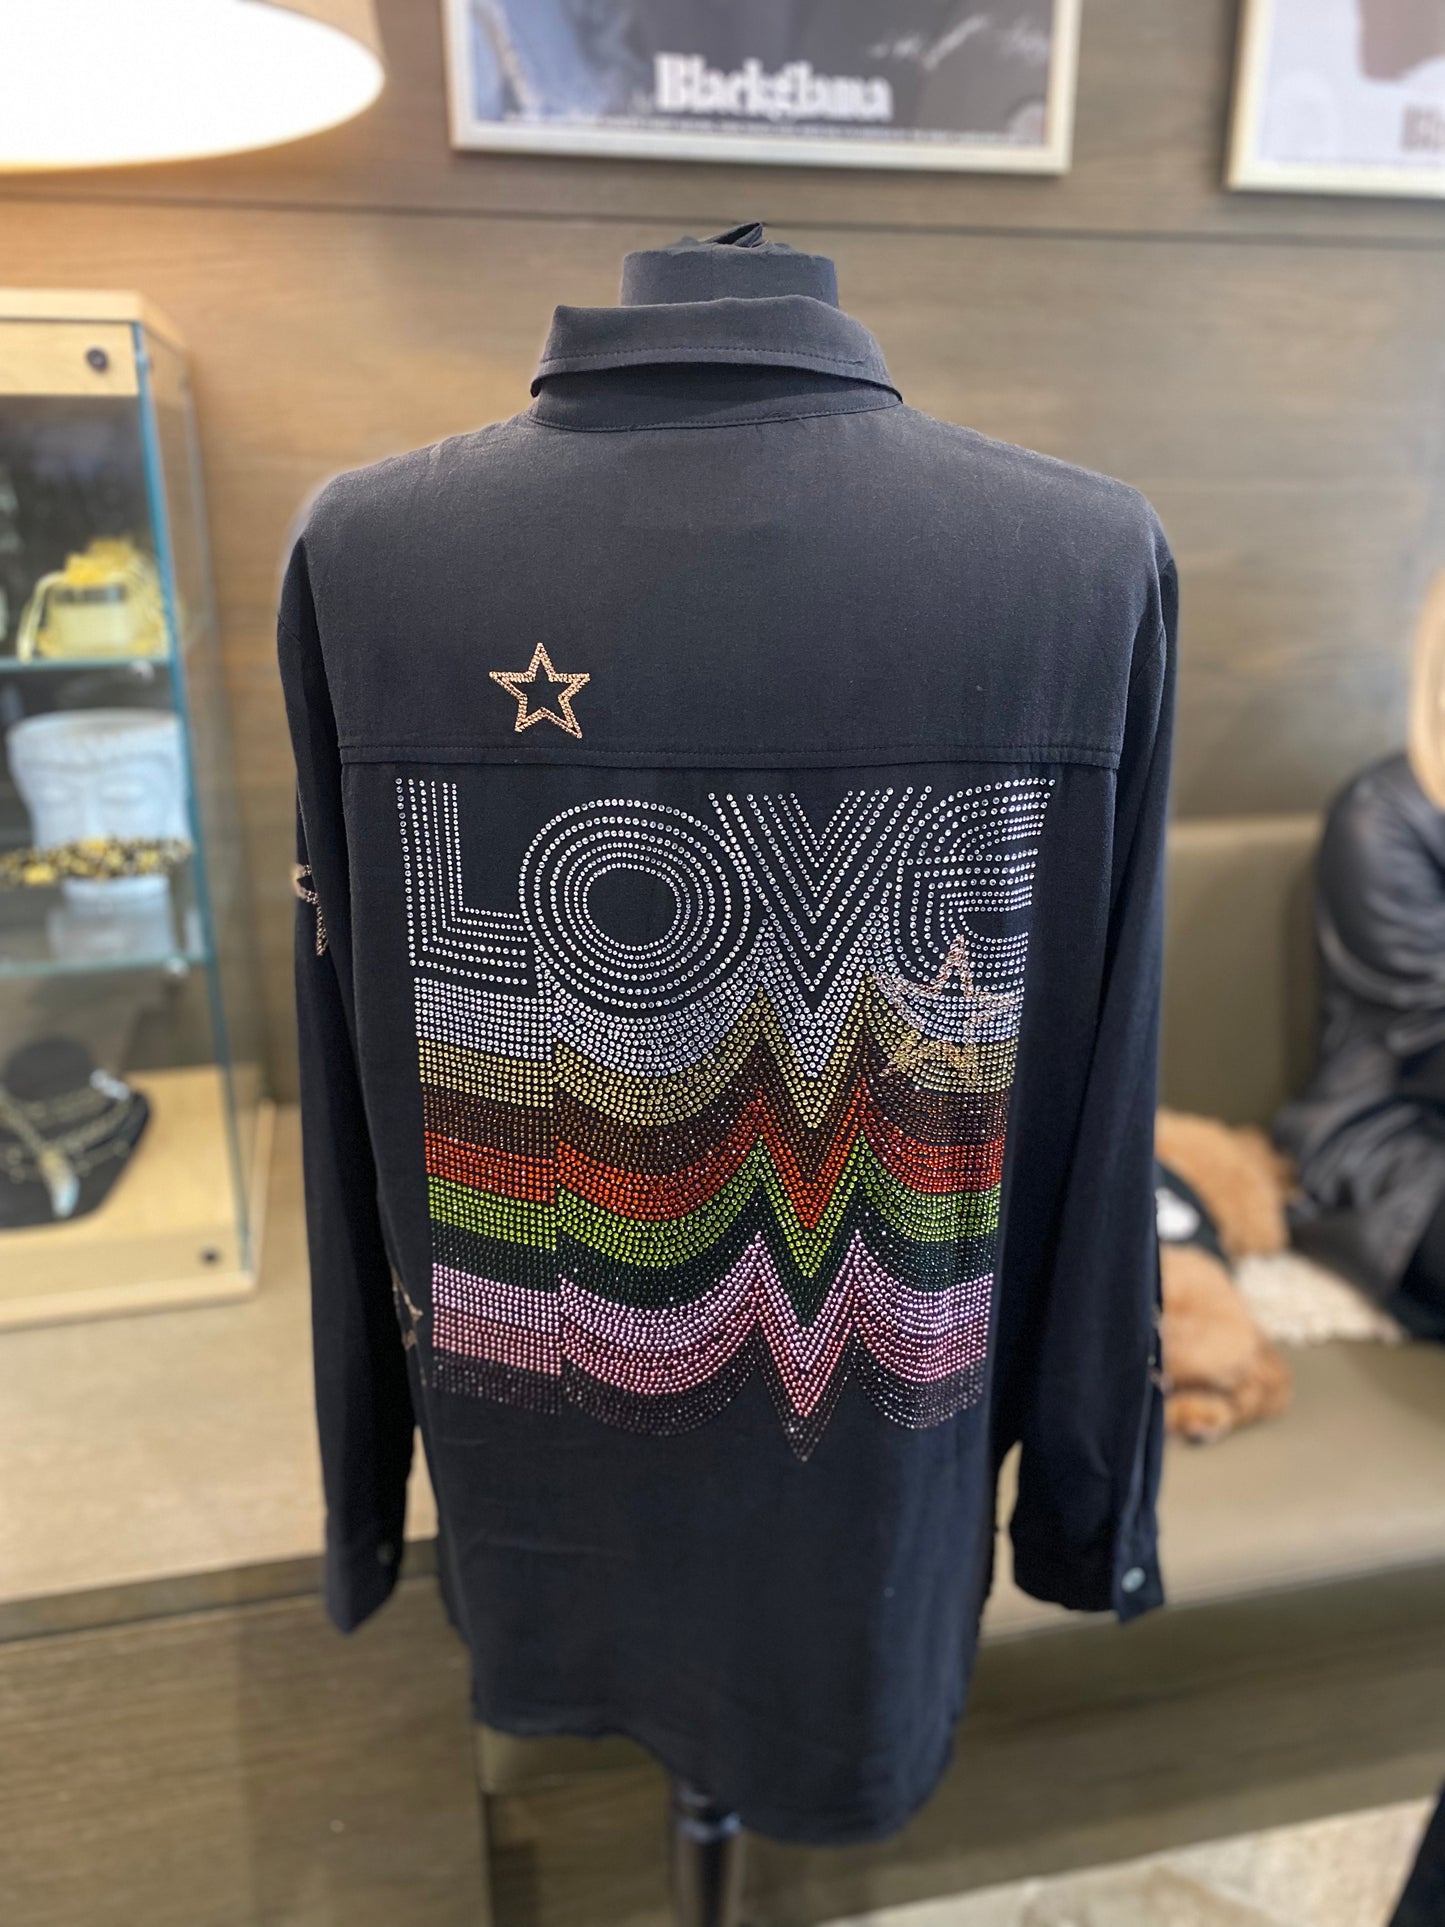 Moving Forward Love Repeating, Peace, Hamsa, Lightening Bolt Tiger  Embroidered Star Black Top Button Down Shirt